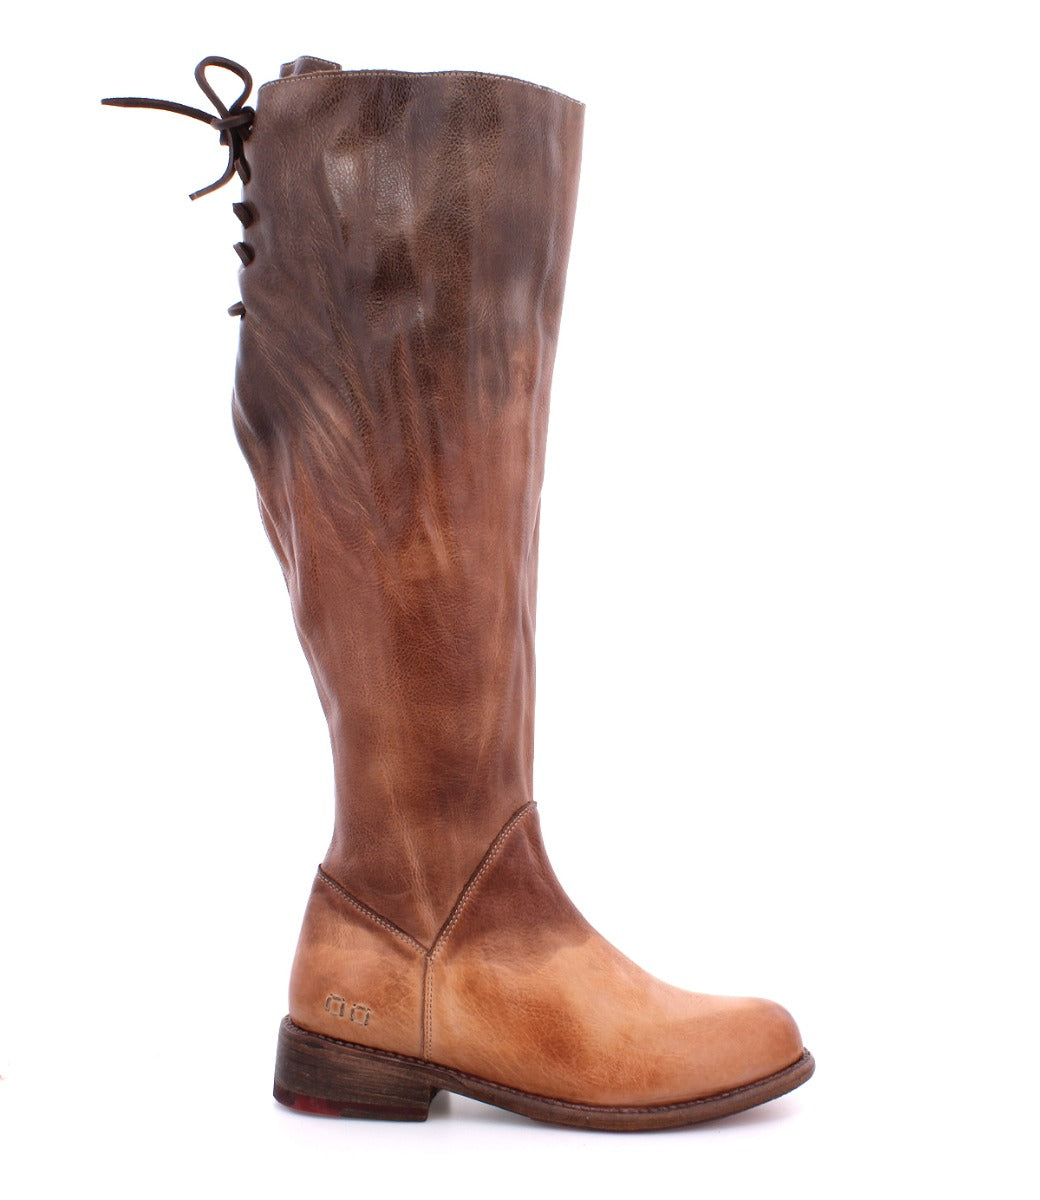 A women's Manchester Wide Calf boot with a brown leather sole by Bed Stu.